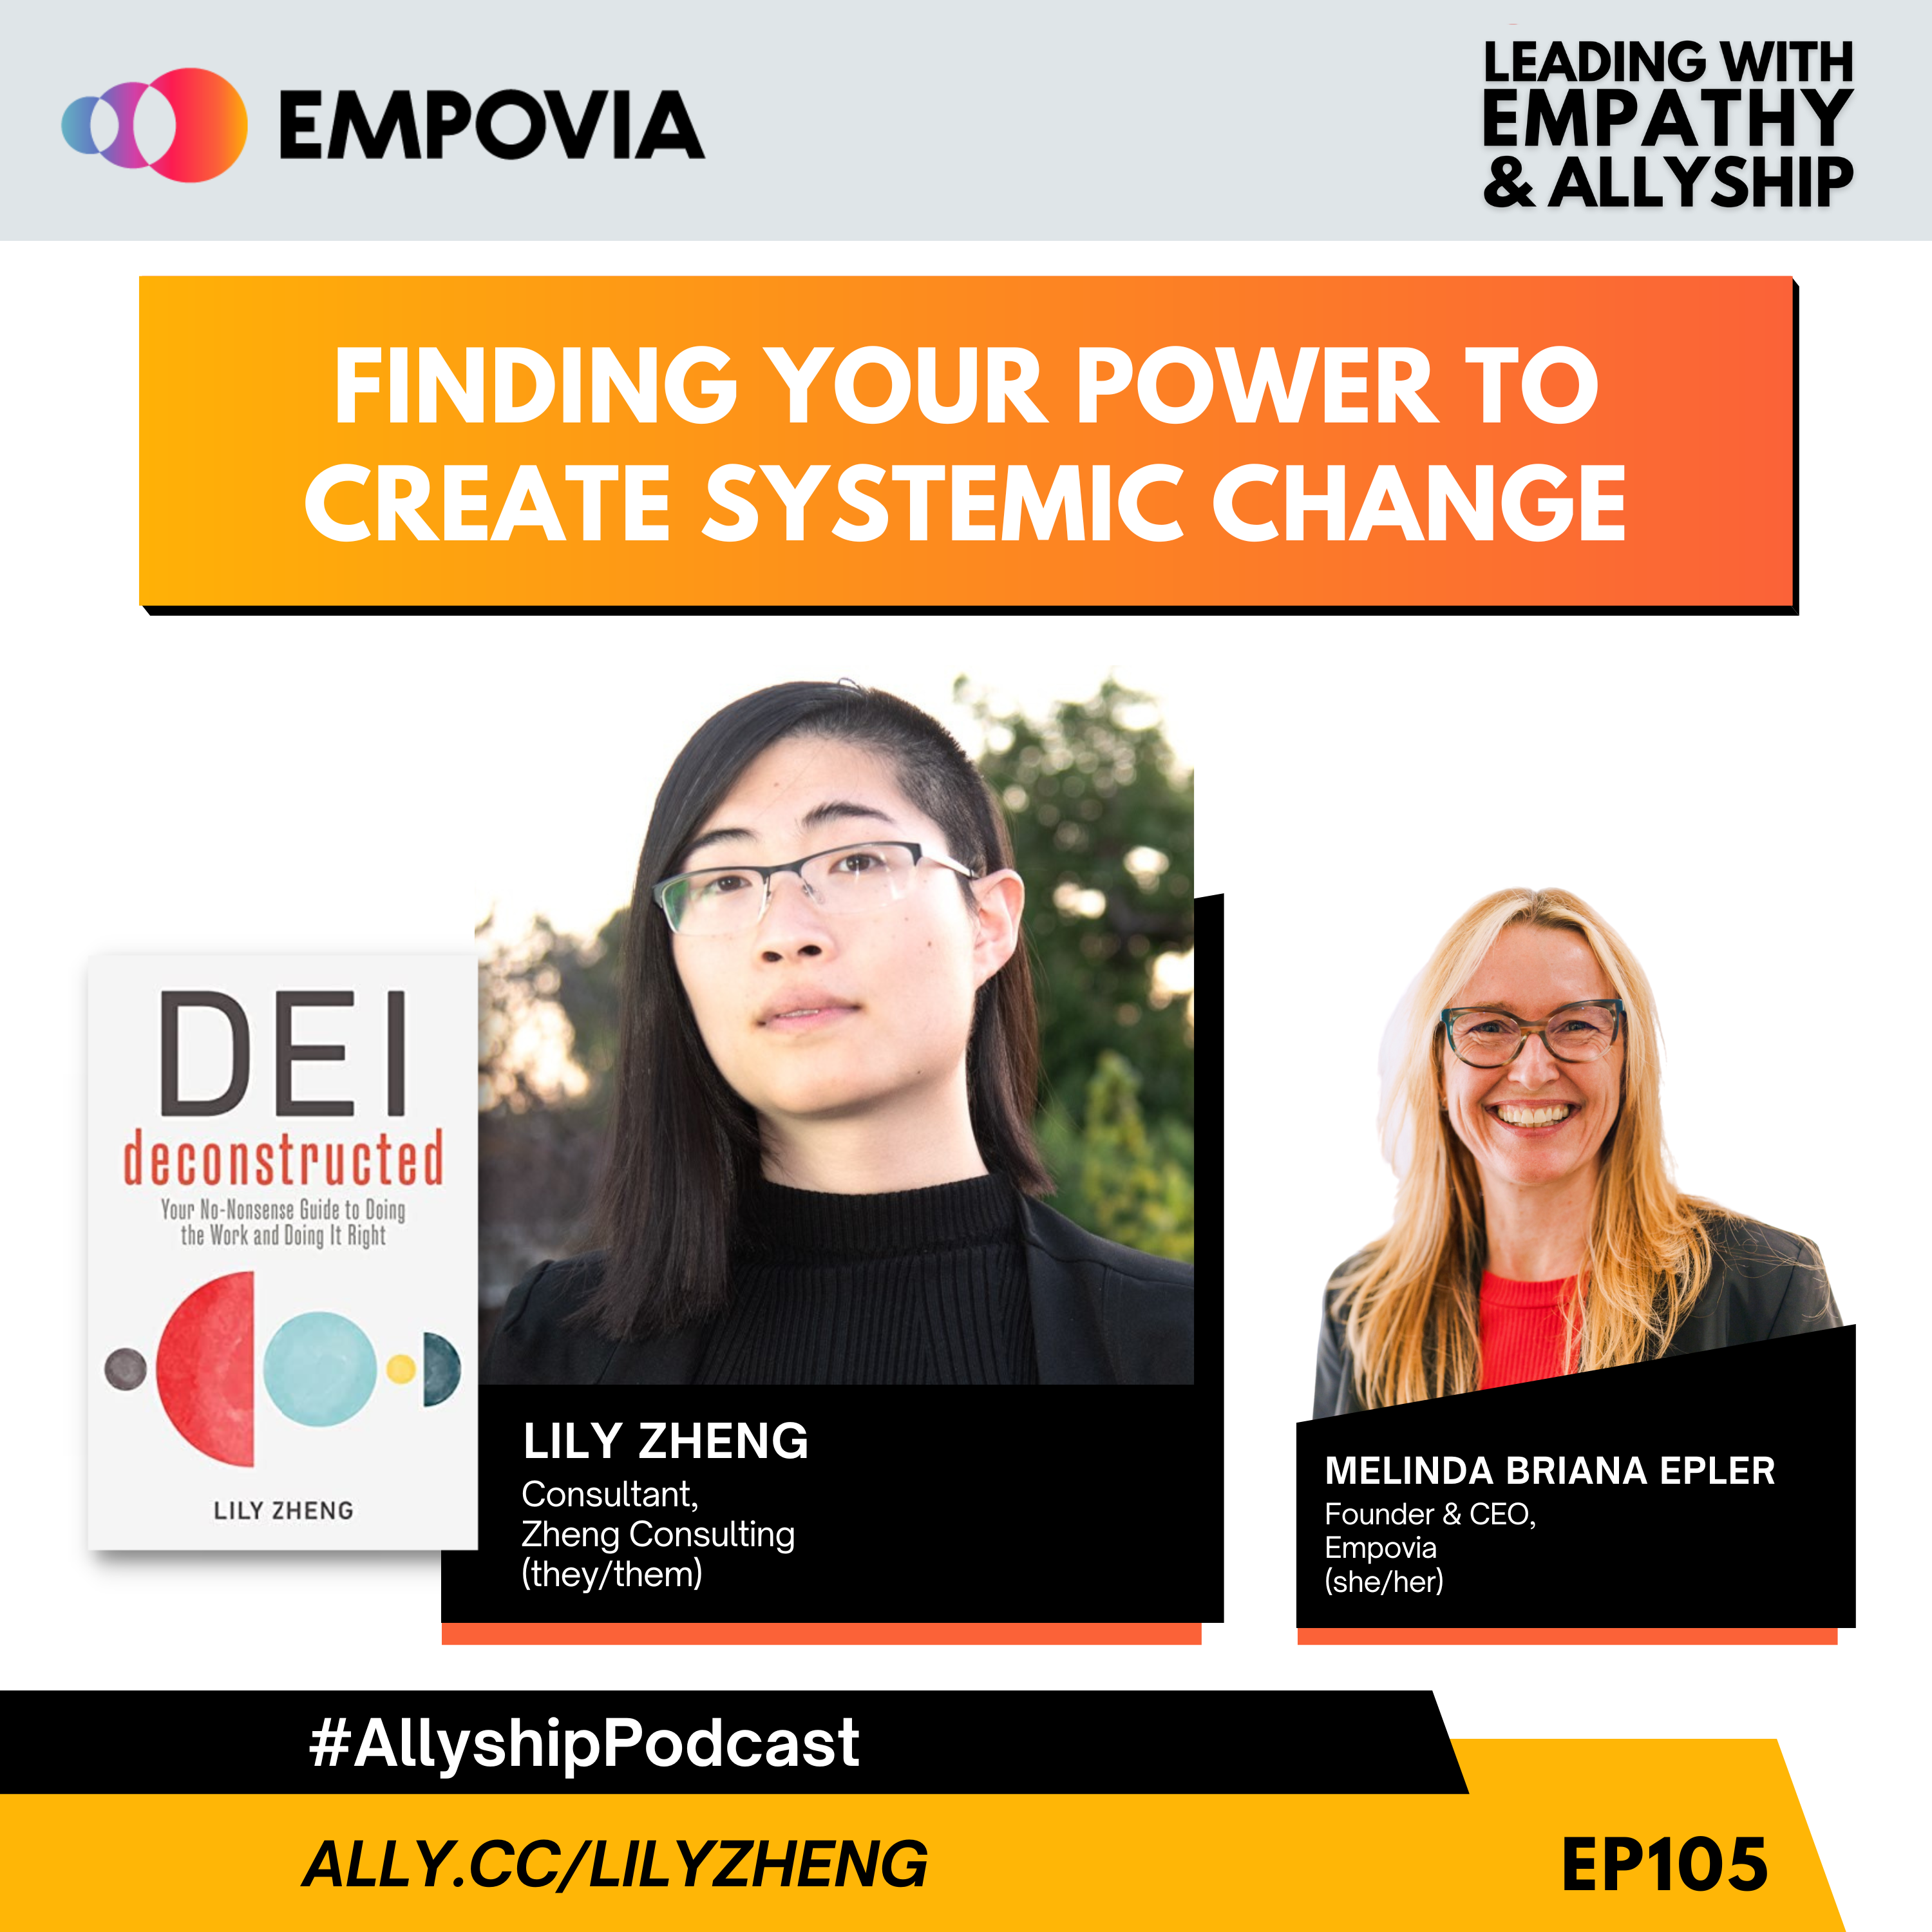 Leading With Empathy & Allyship promo and photos of Lily Zheng, a Chinese American nonbinary person with dark brown assymetric hair that is half shaved, glasses, black shirt, and black jacket; beside them is the off-white book cover of DEI Deconstructed: Your No-Nonsense Guide to Doing the Work and Doing It Right; and host Melinda Briana Epler, a White woman with blonde and red hair, glasses, red shirt, and black jacket.